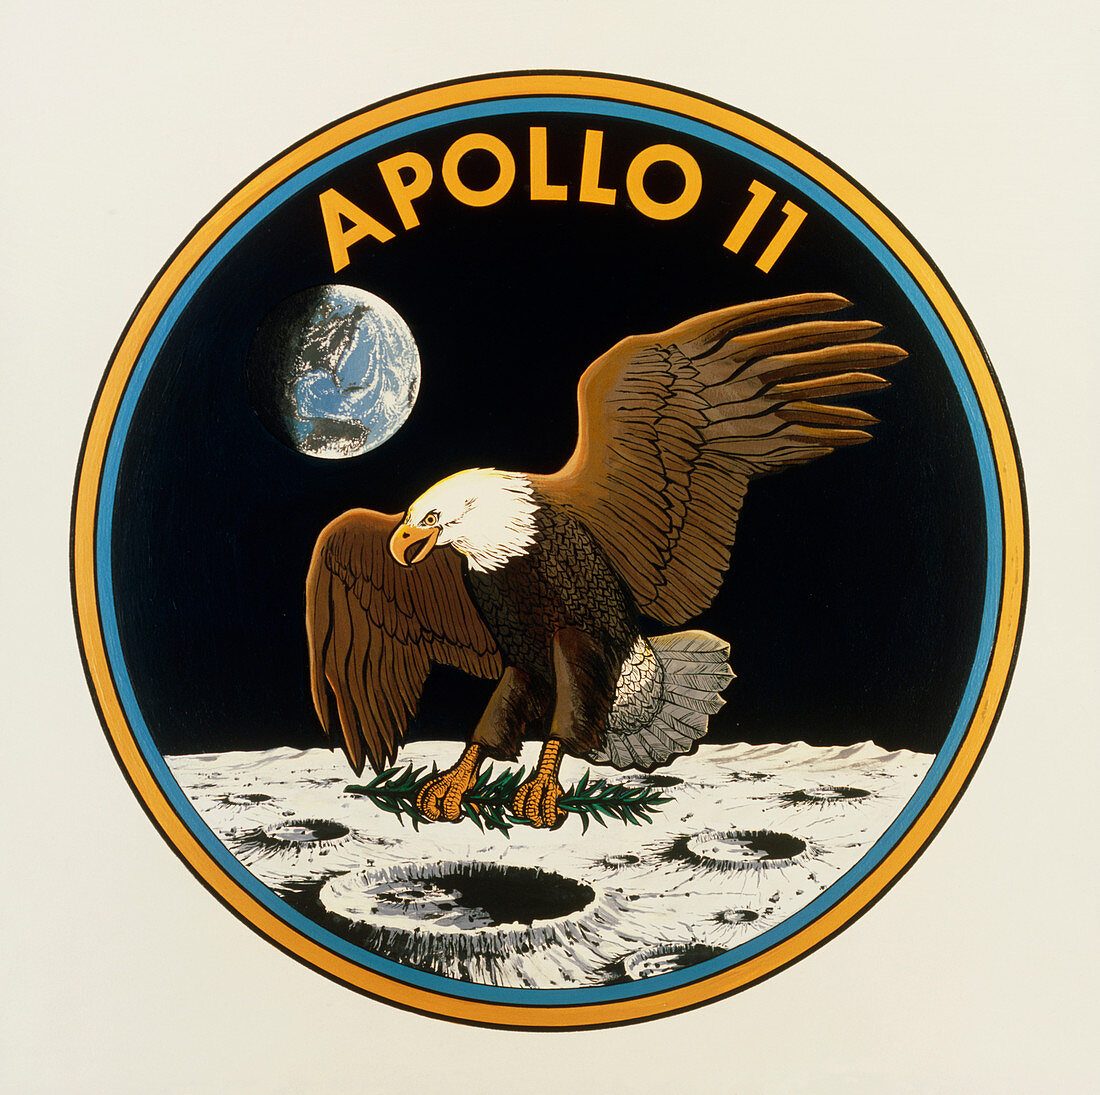 NASA's official emblem for the Apollo 11 mission